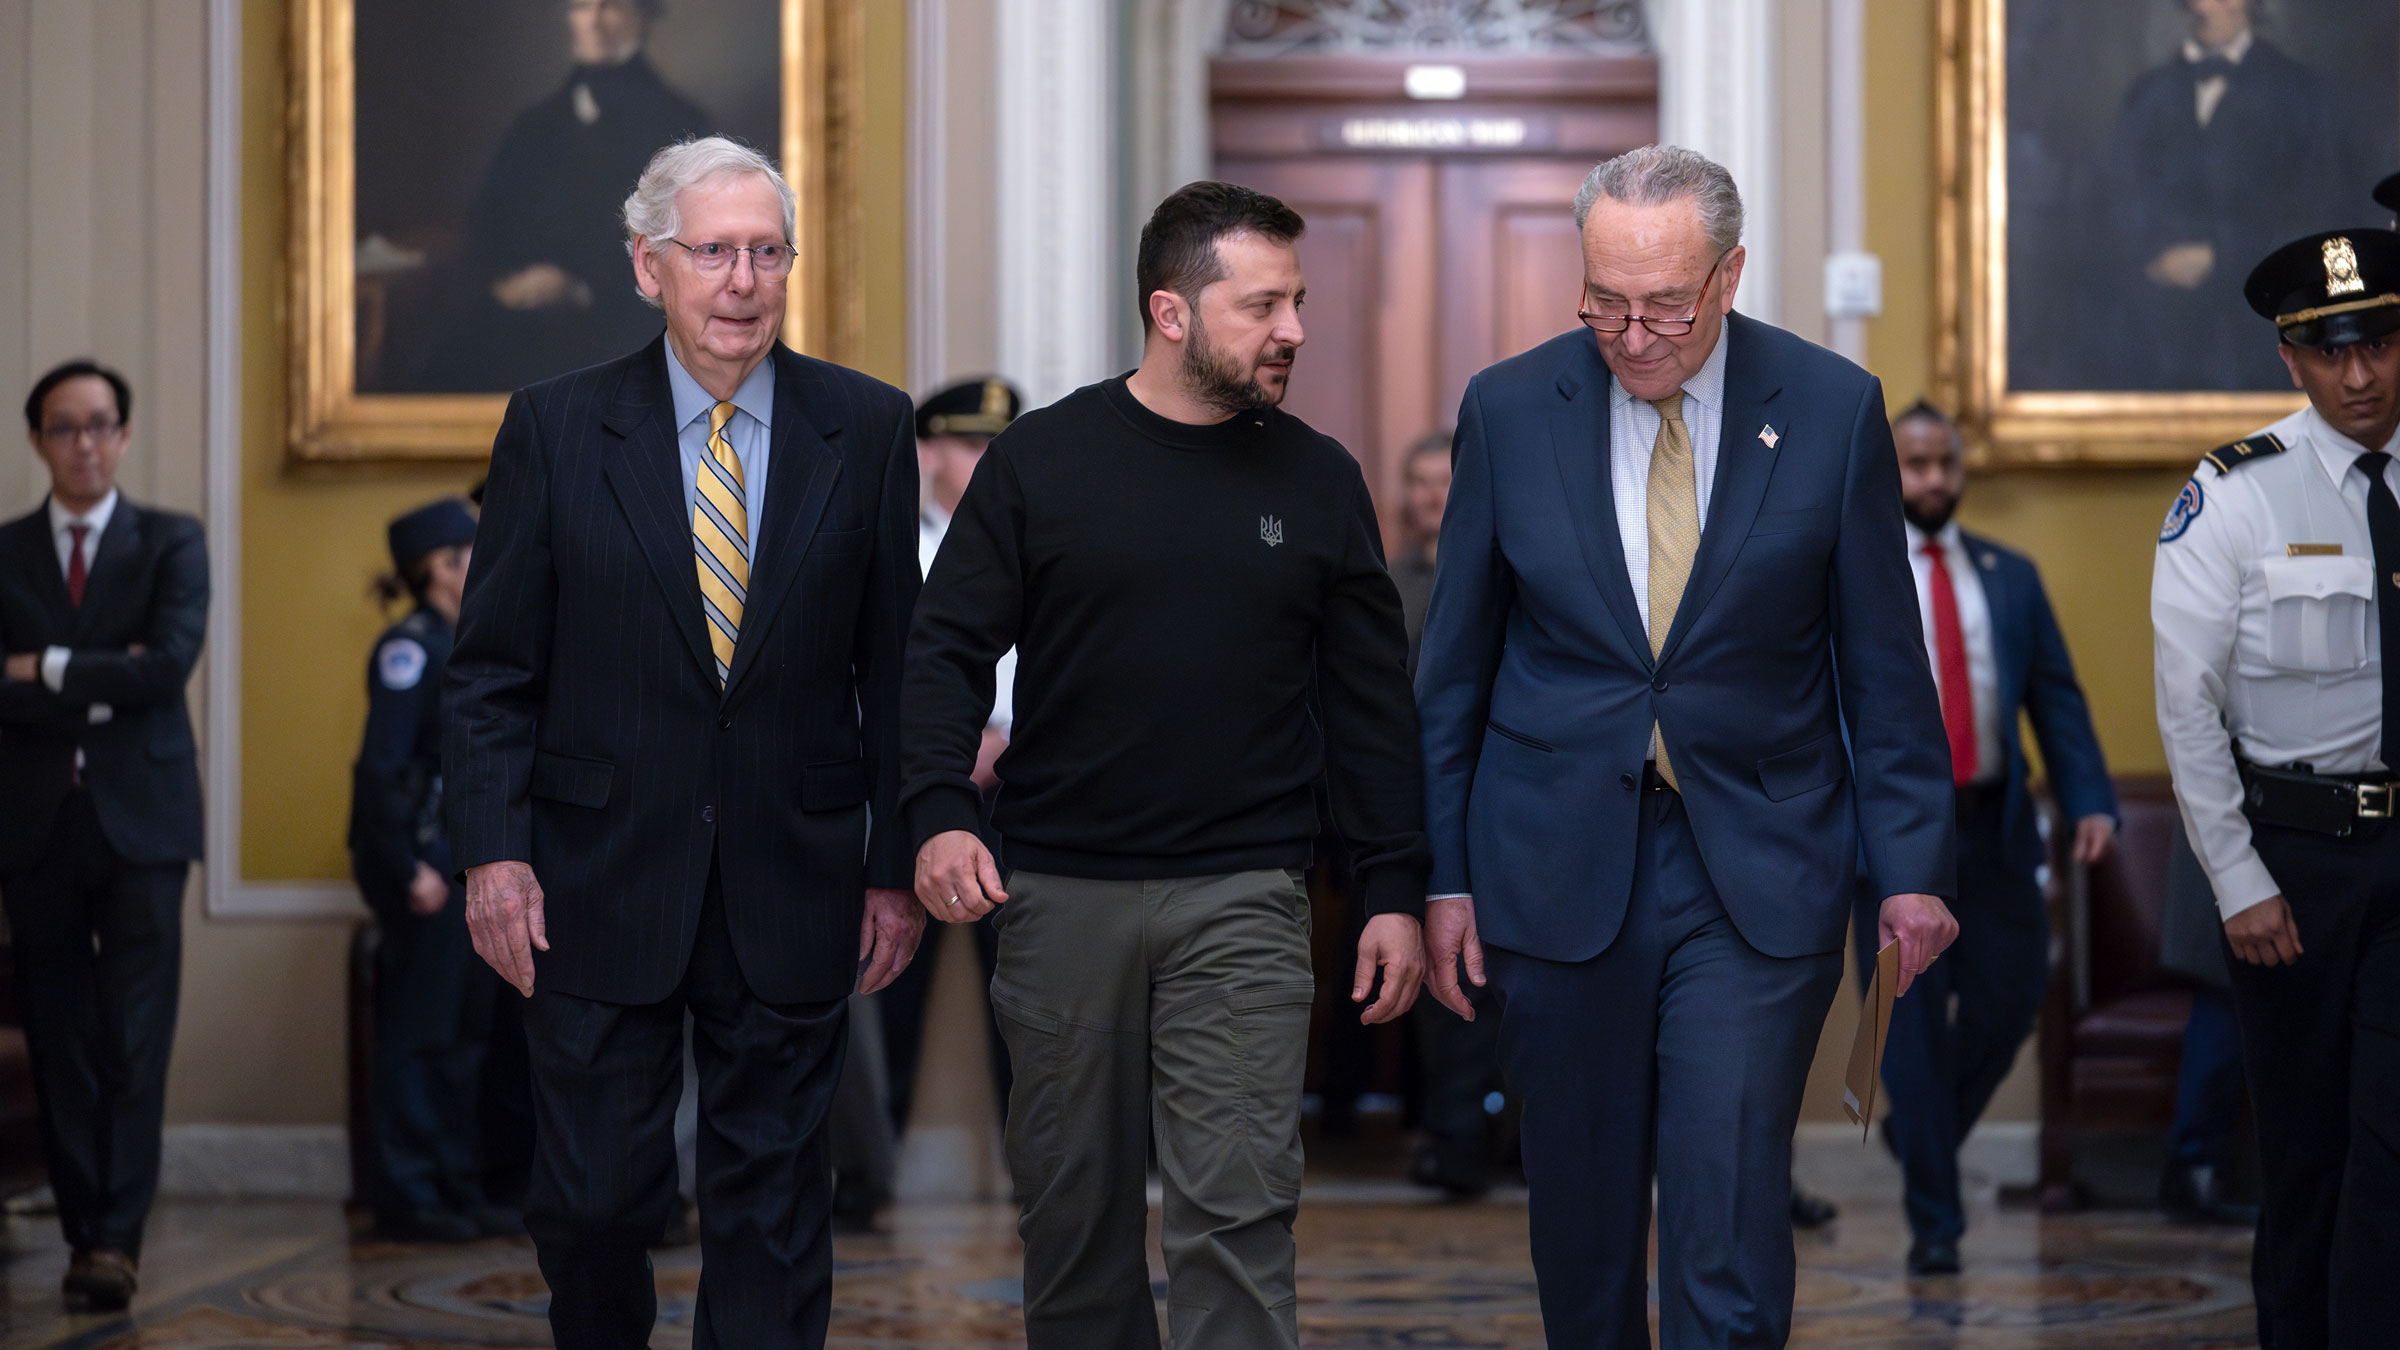 Ukrainian President Volodymyr Zelensky, center, is escorted by Senate Minority Leader Mitch McConnell, left, and Senate Majority Leader Chuck Schumer on Tuesday.